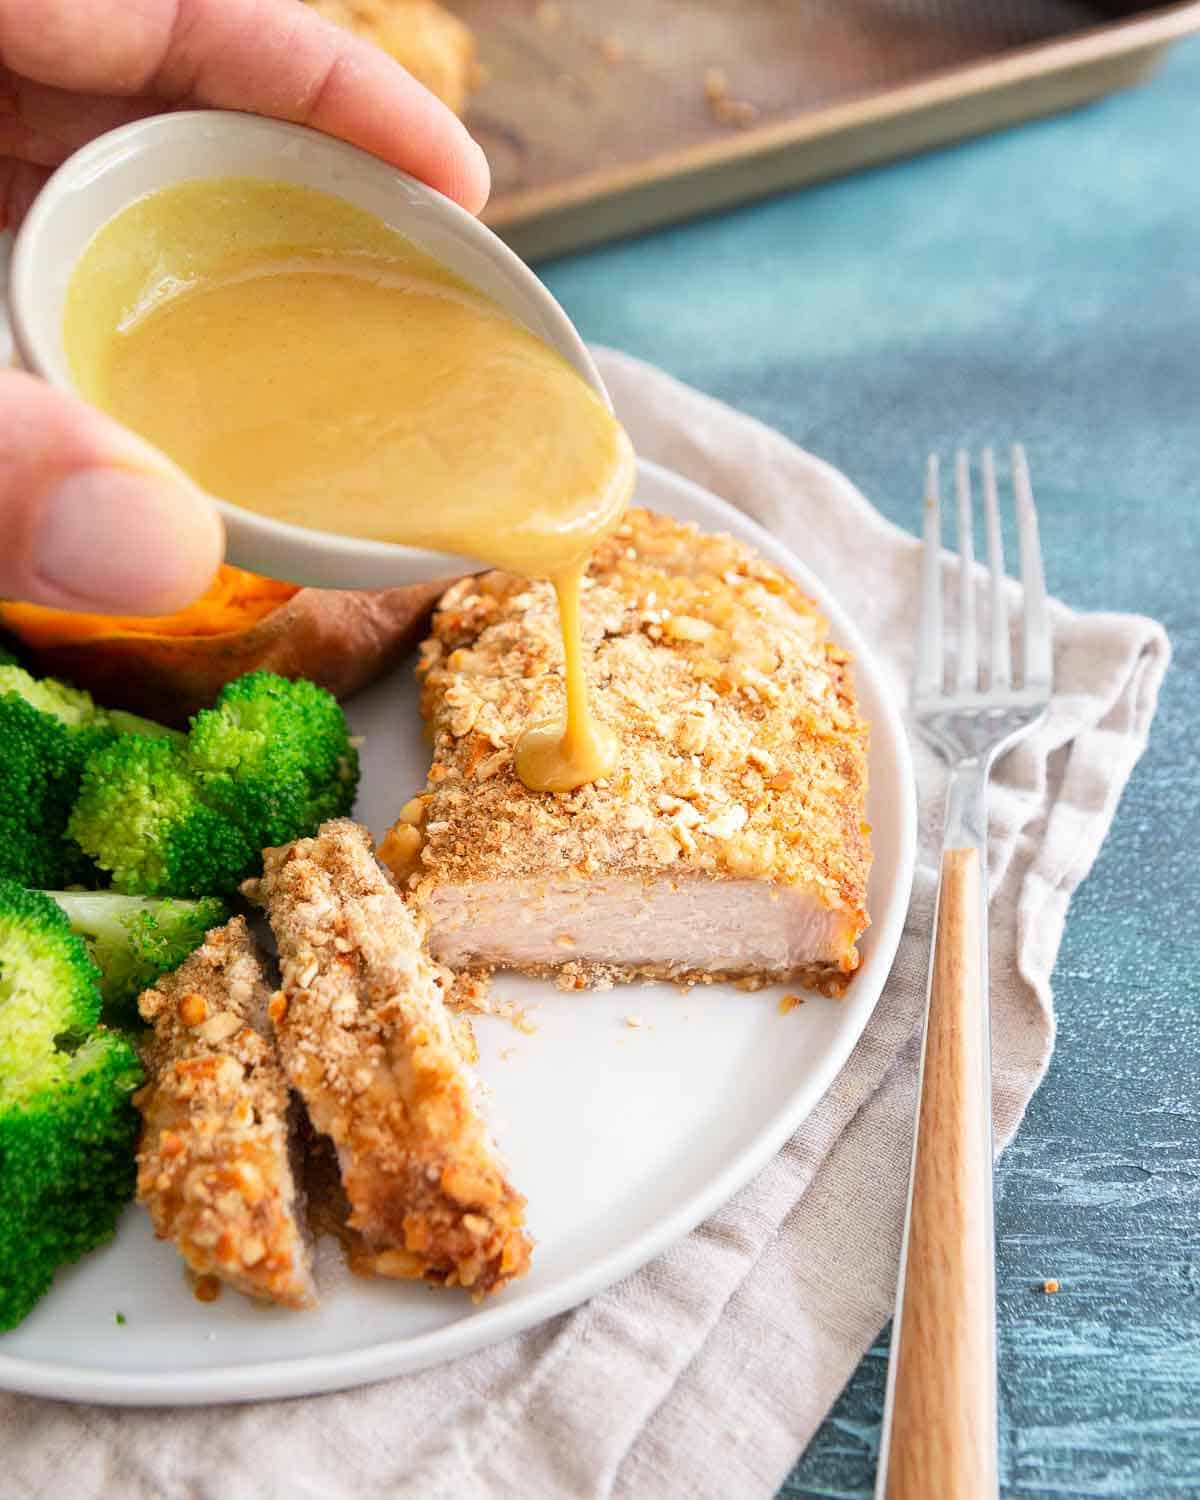 A quick maple dijon sauce goes perfectly with these easy baked pretzel crusted pork chops.